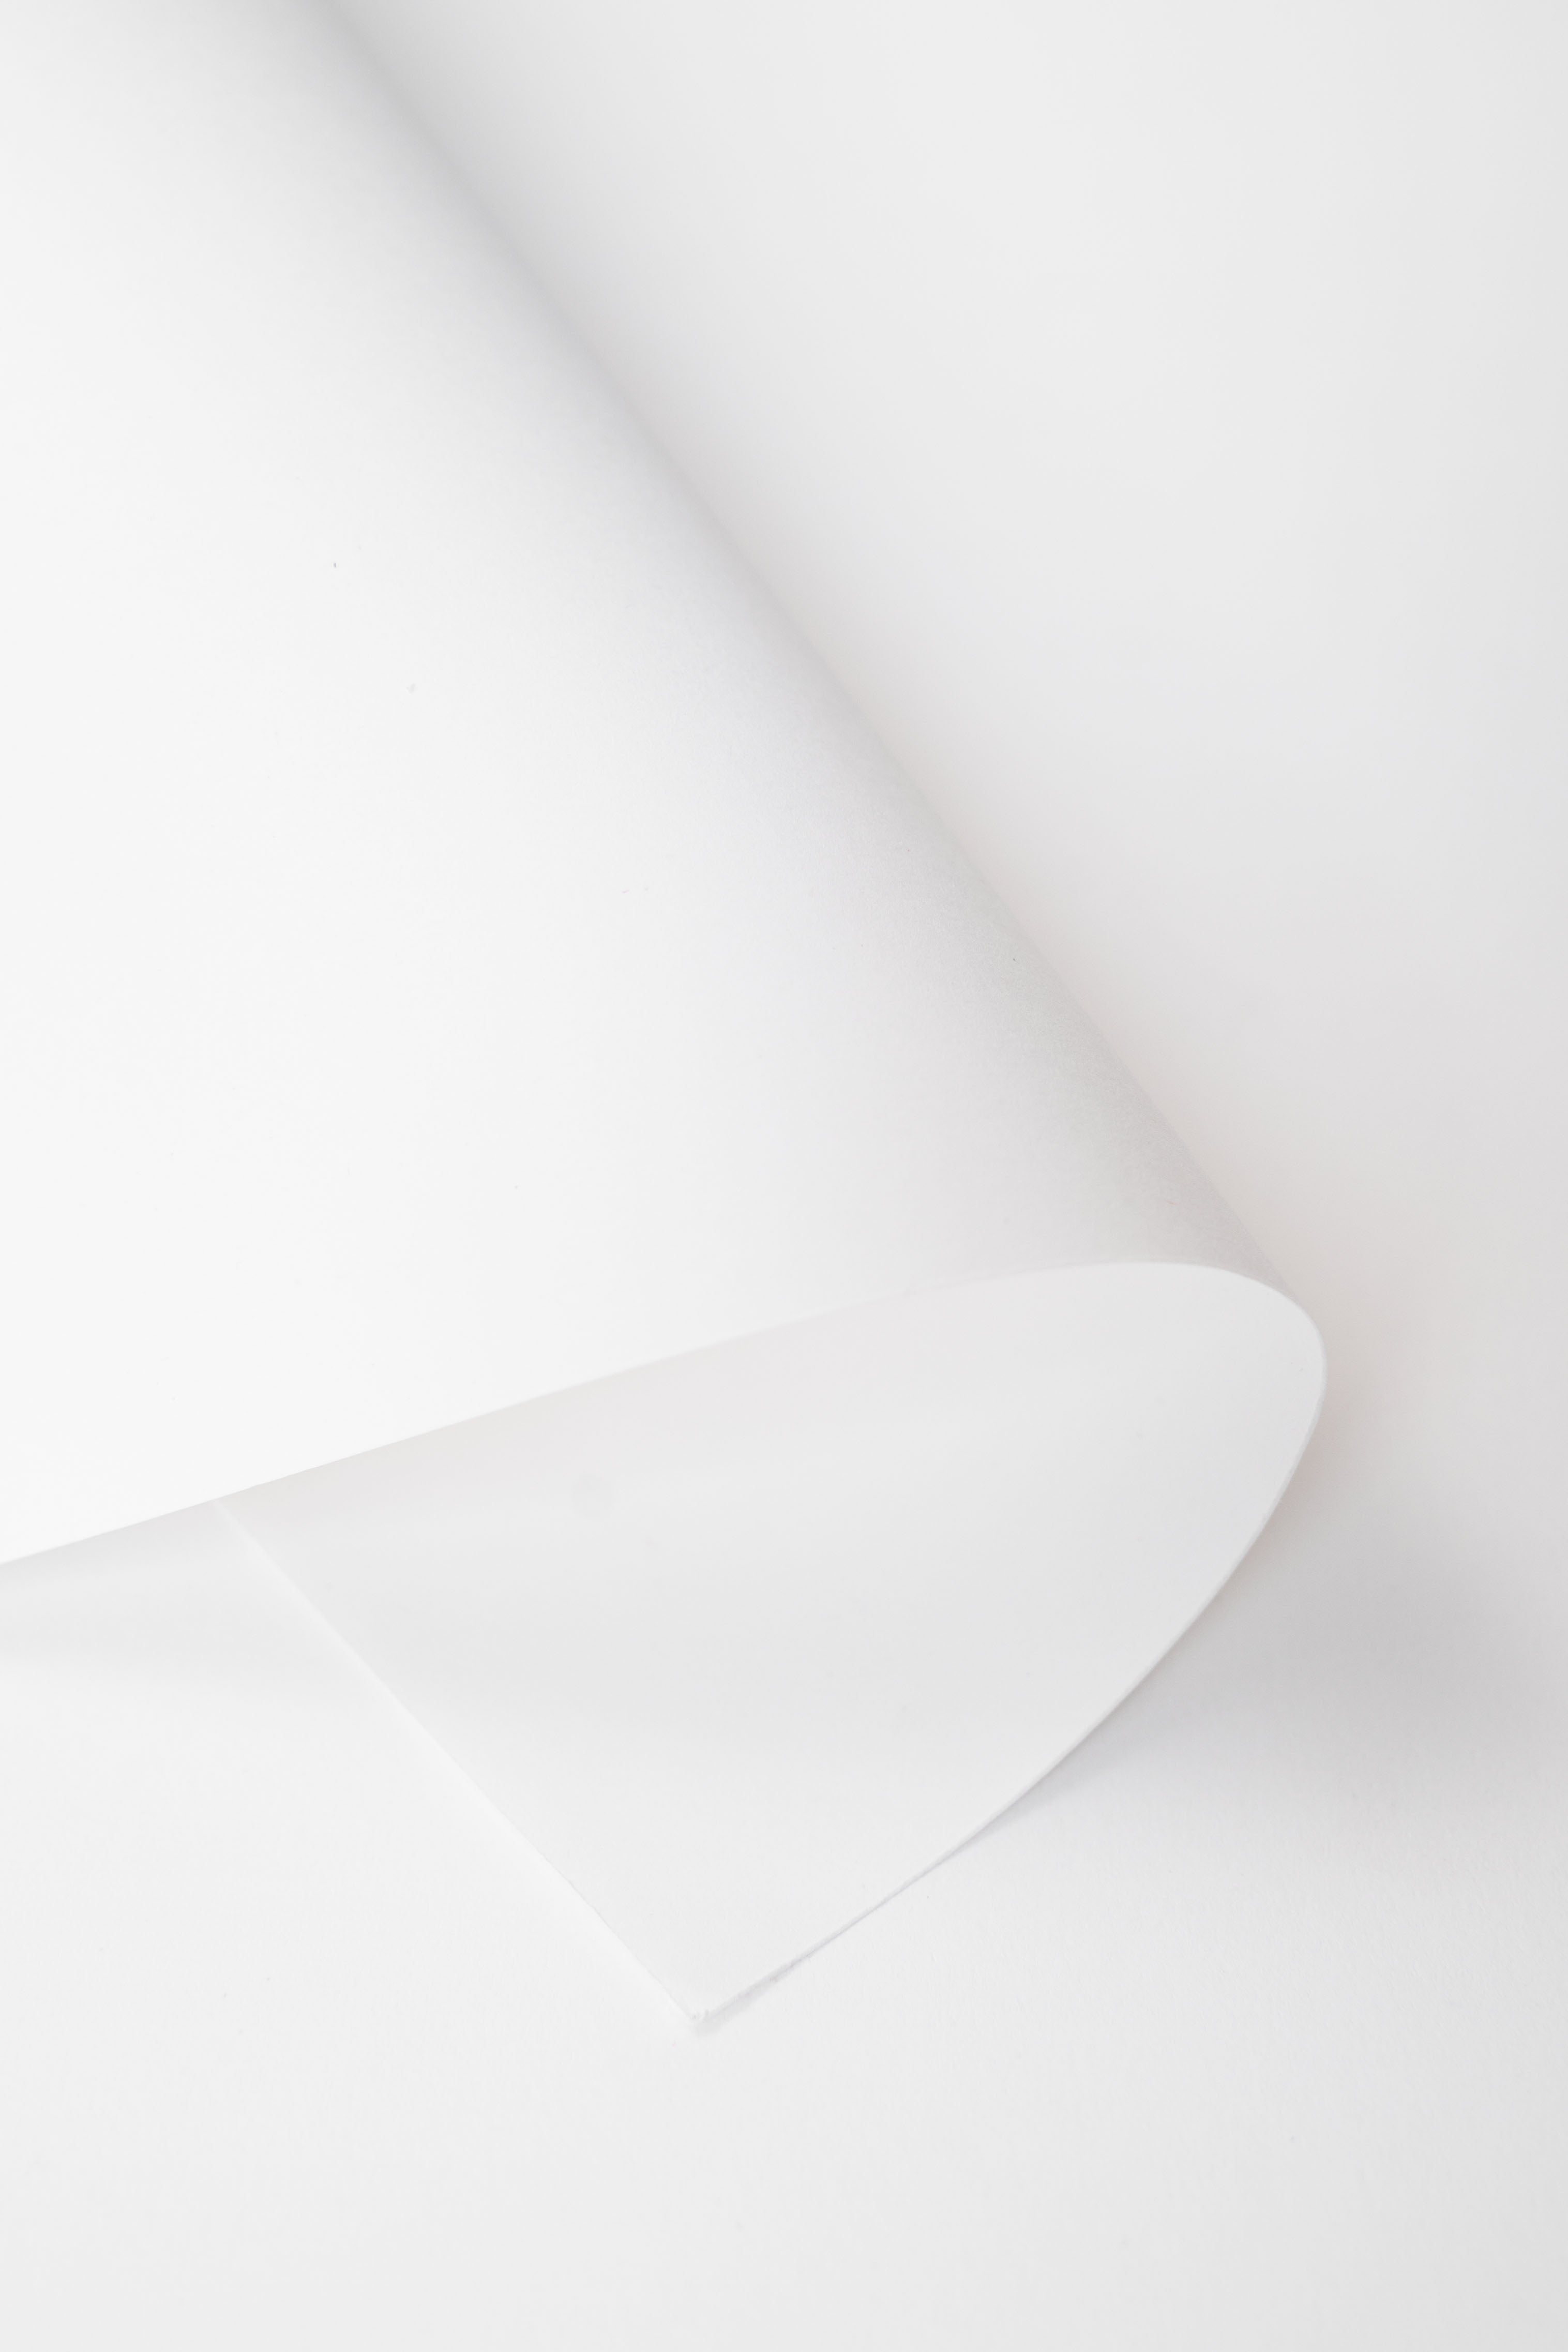 Kate Cool White Seamless Paper Backdrop for Photography 4.4x32ft(1.35x10m)